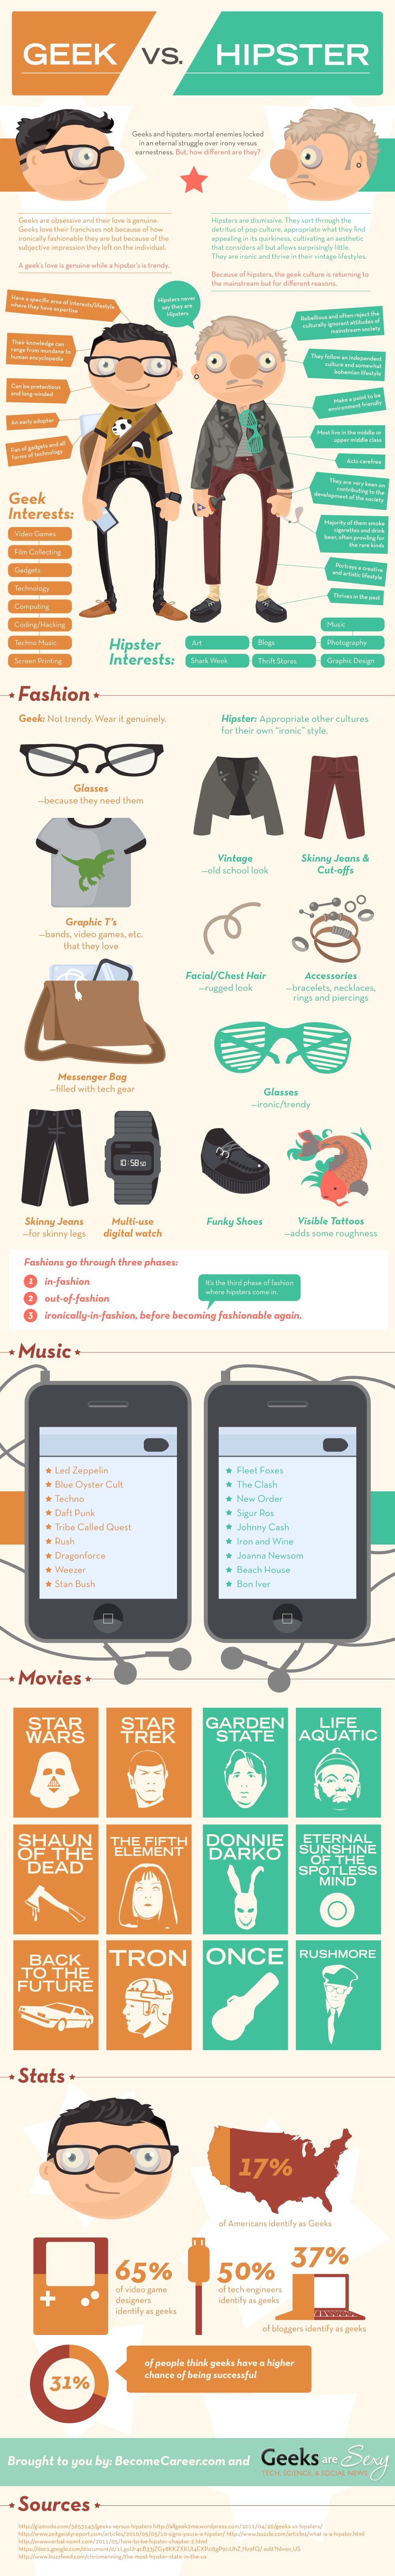 geeks-vs-hispters-infographic